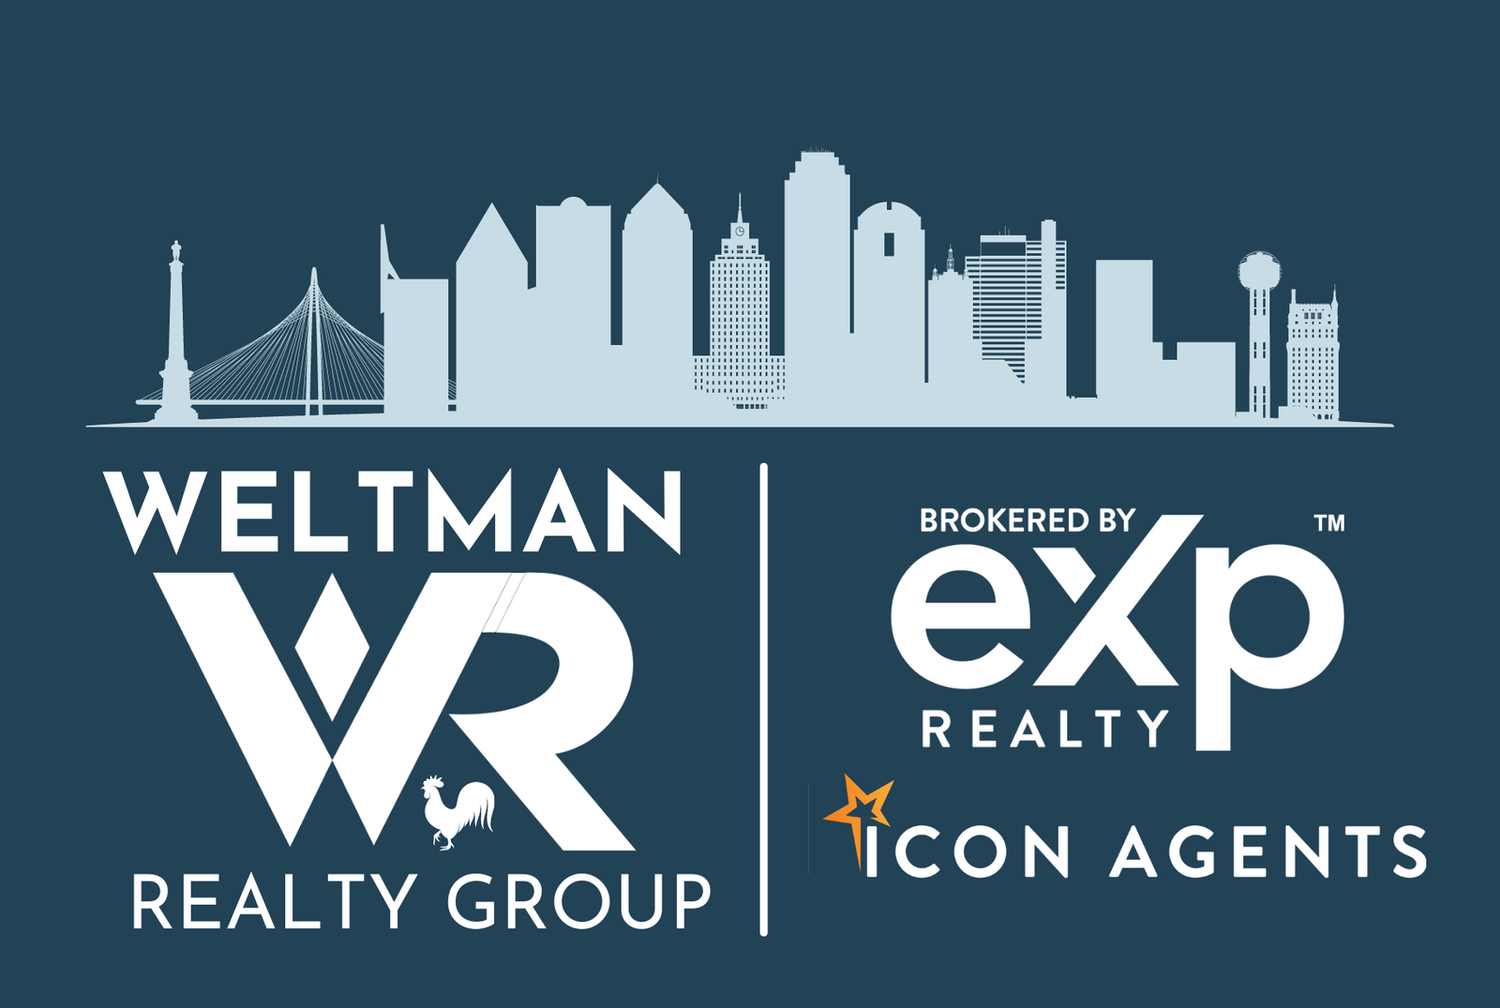 Weltman Realty Group